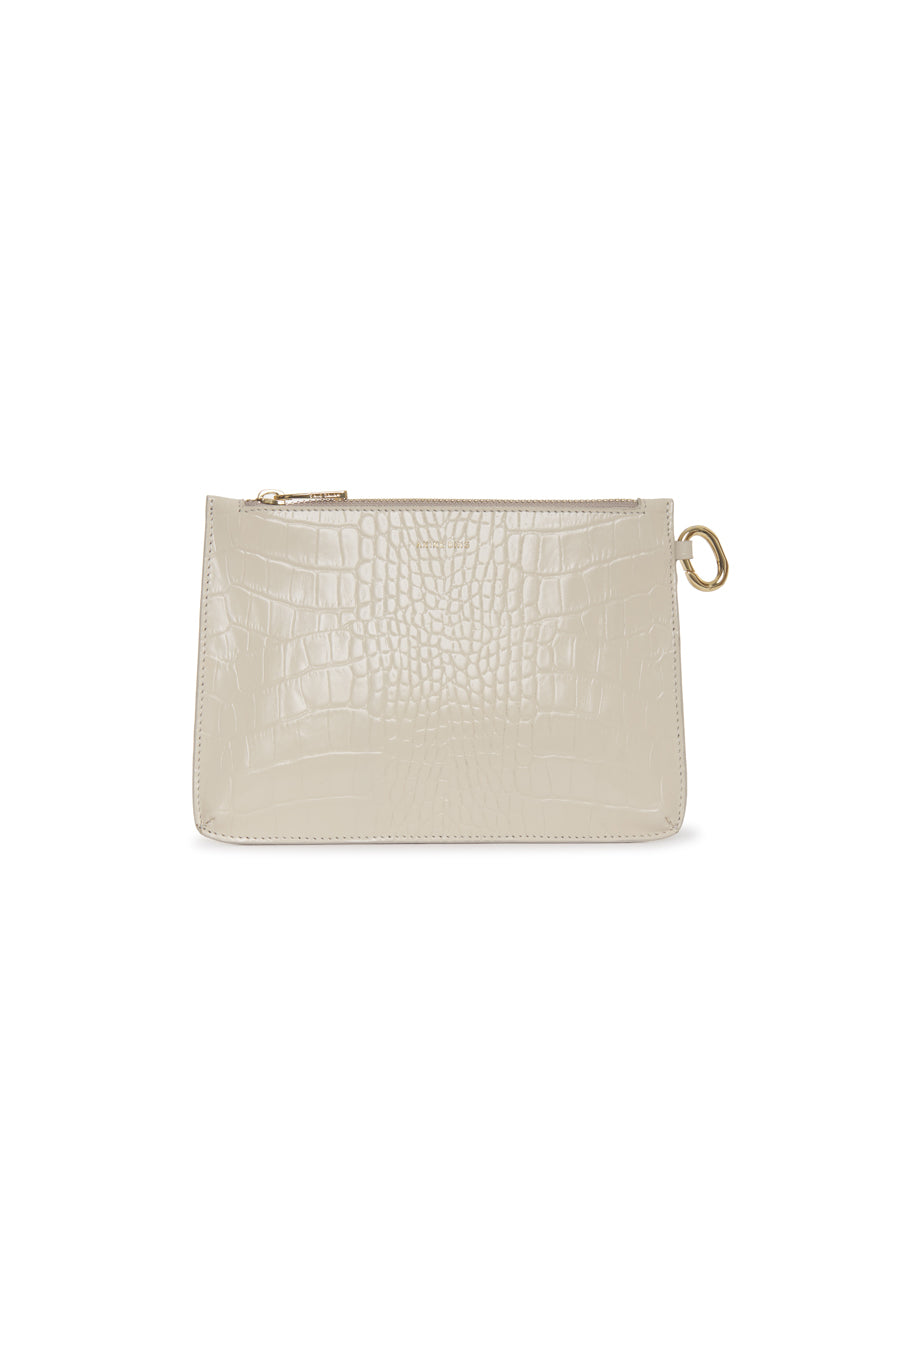 Anine Bing - Liv Pouch in Oyster Croco